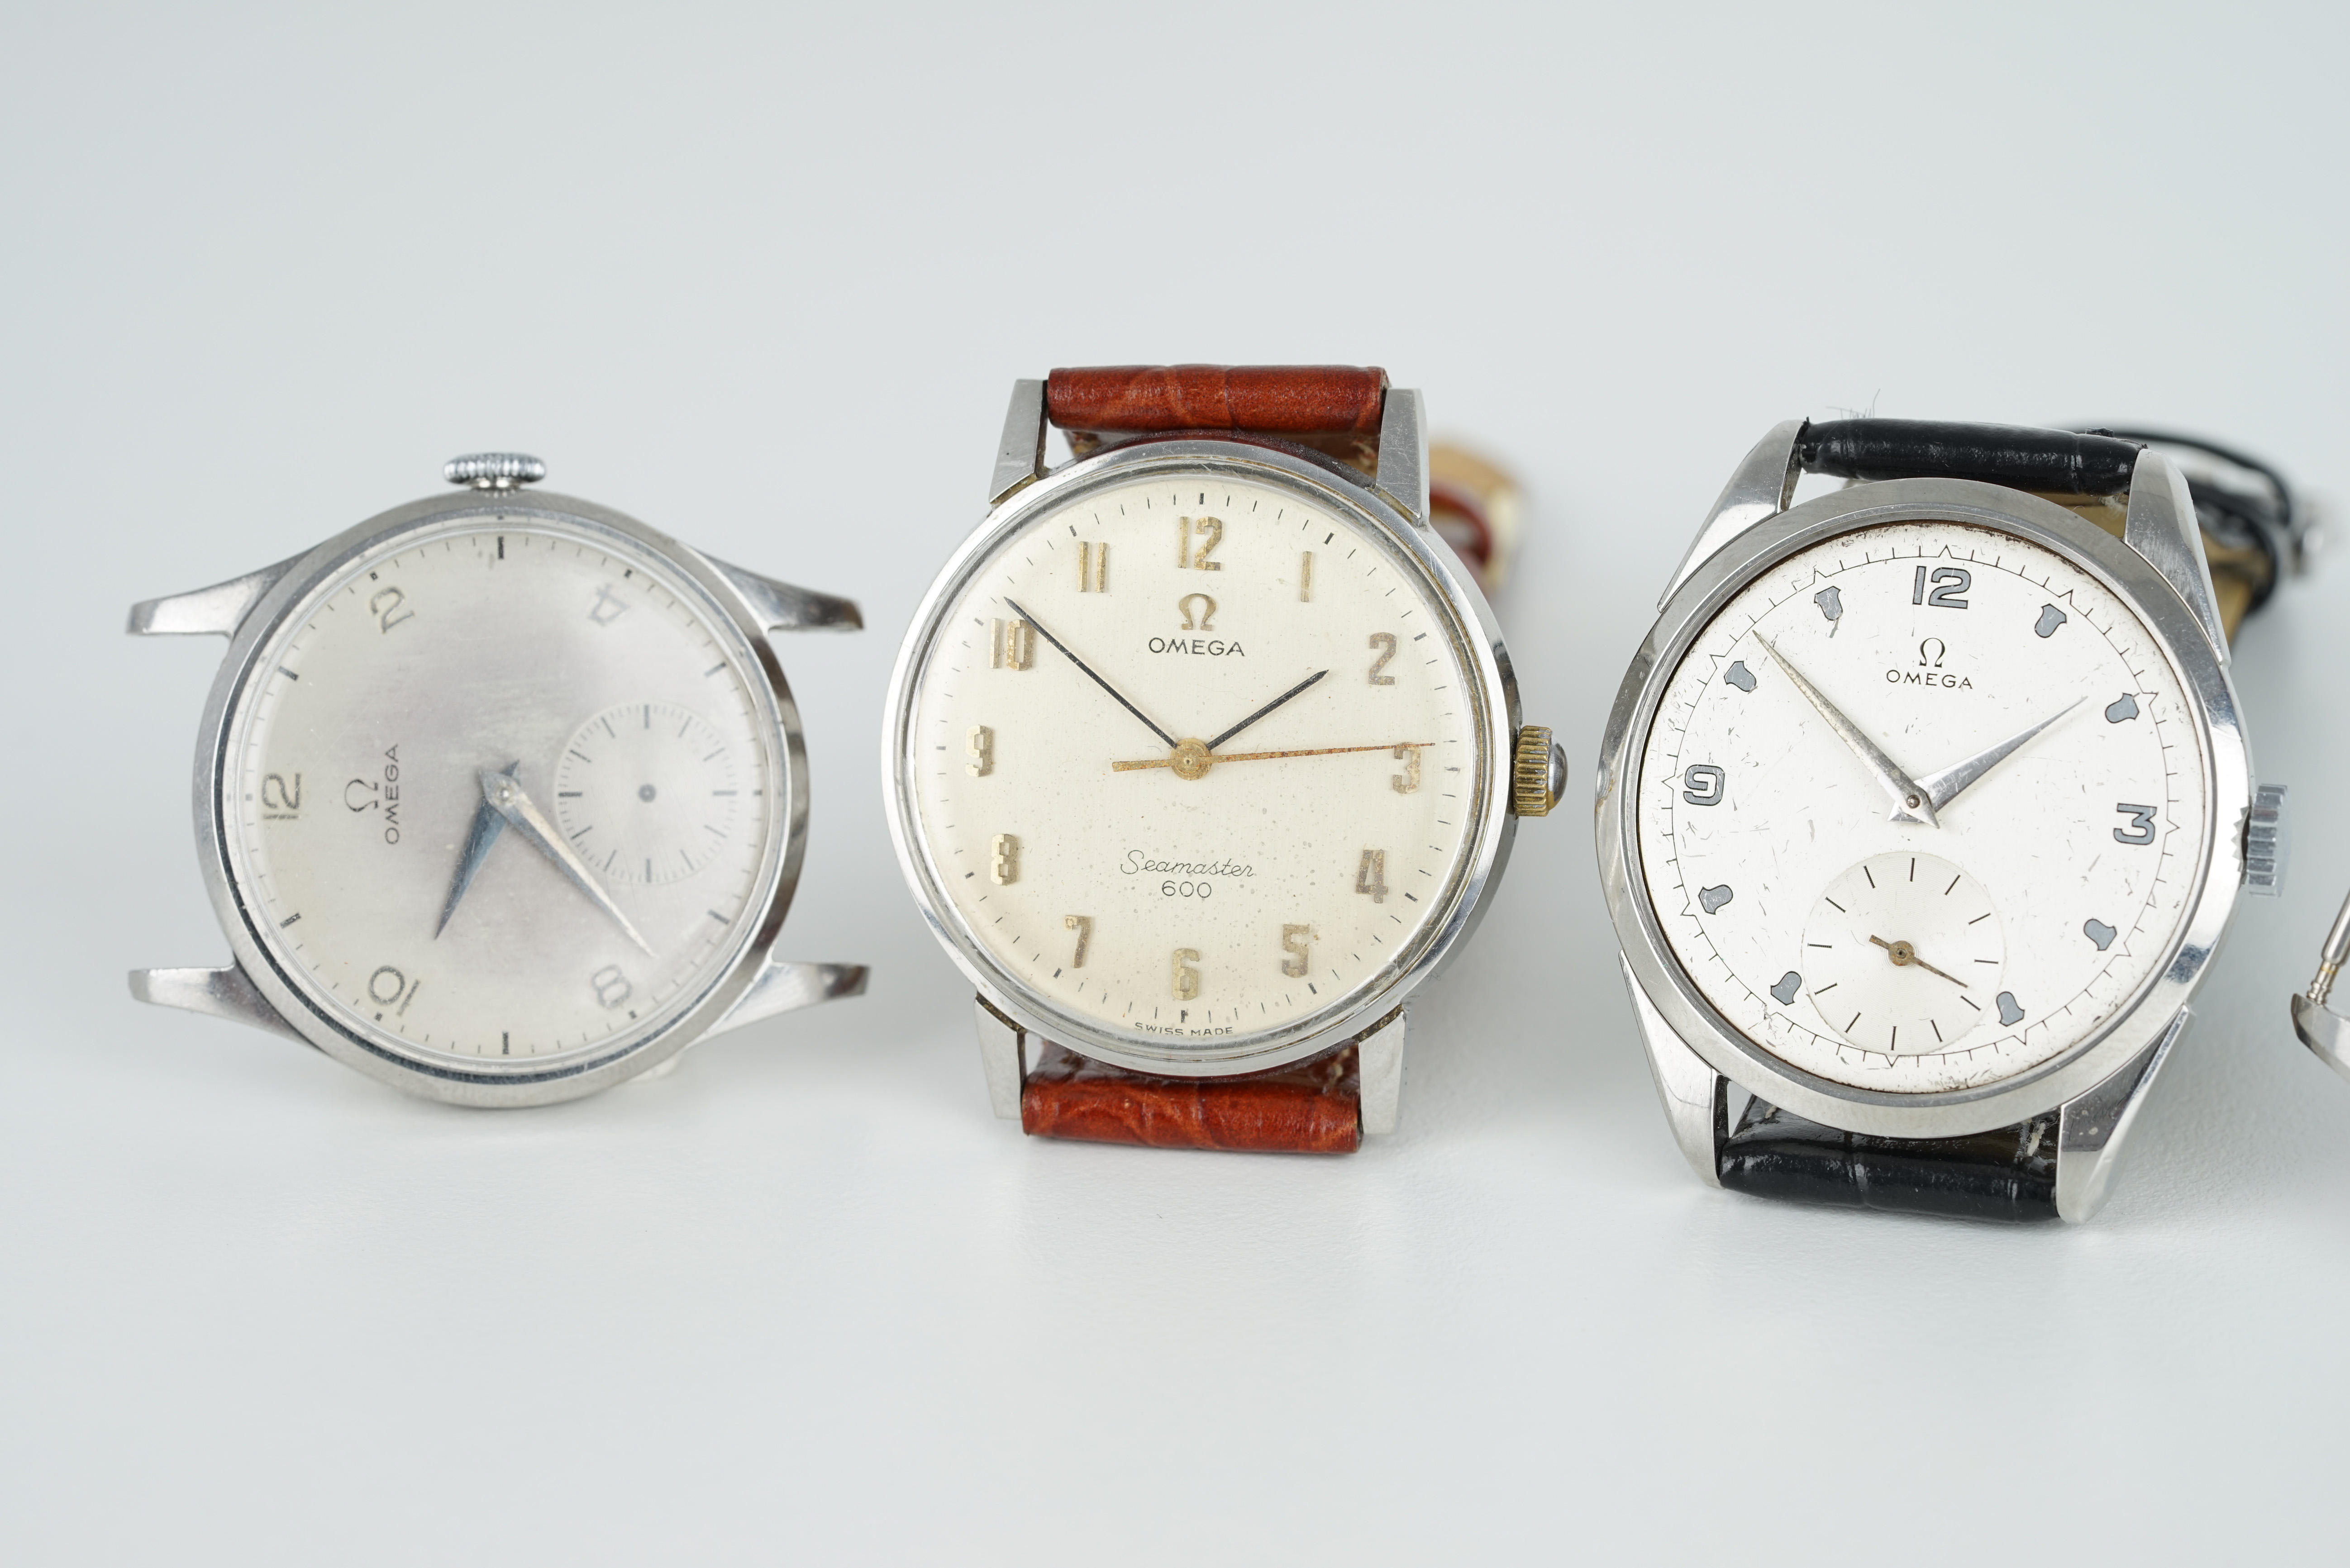 GROUP OF 4 OMEGA WRISTWATCHES, all stainless steel cases with manually wound movements inside, all - Image 2 of 3